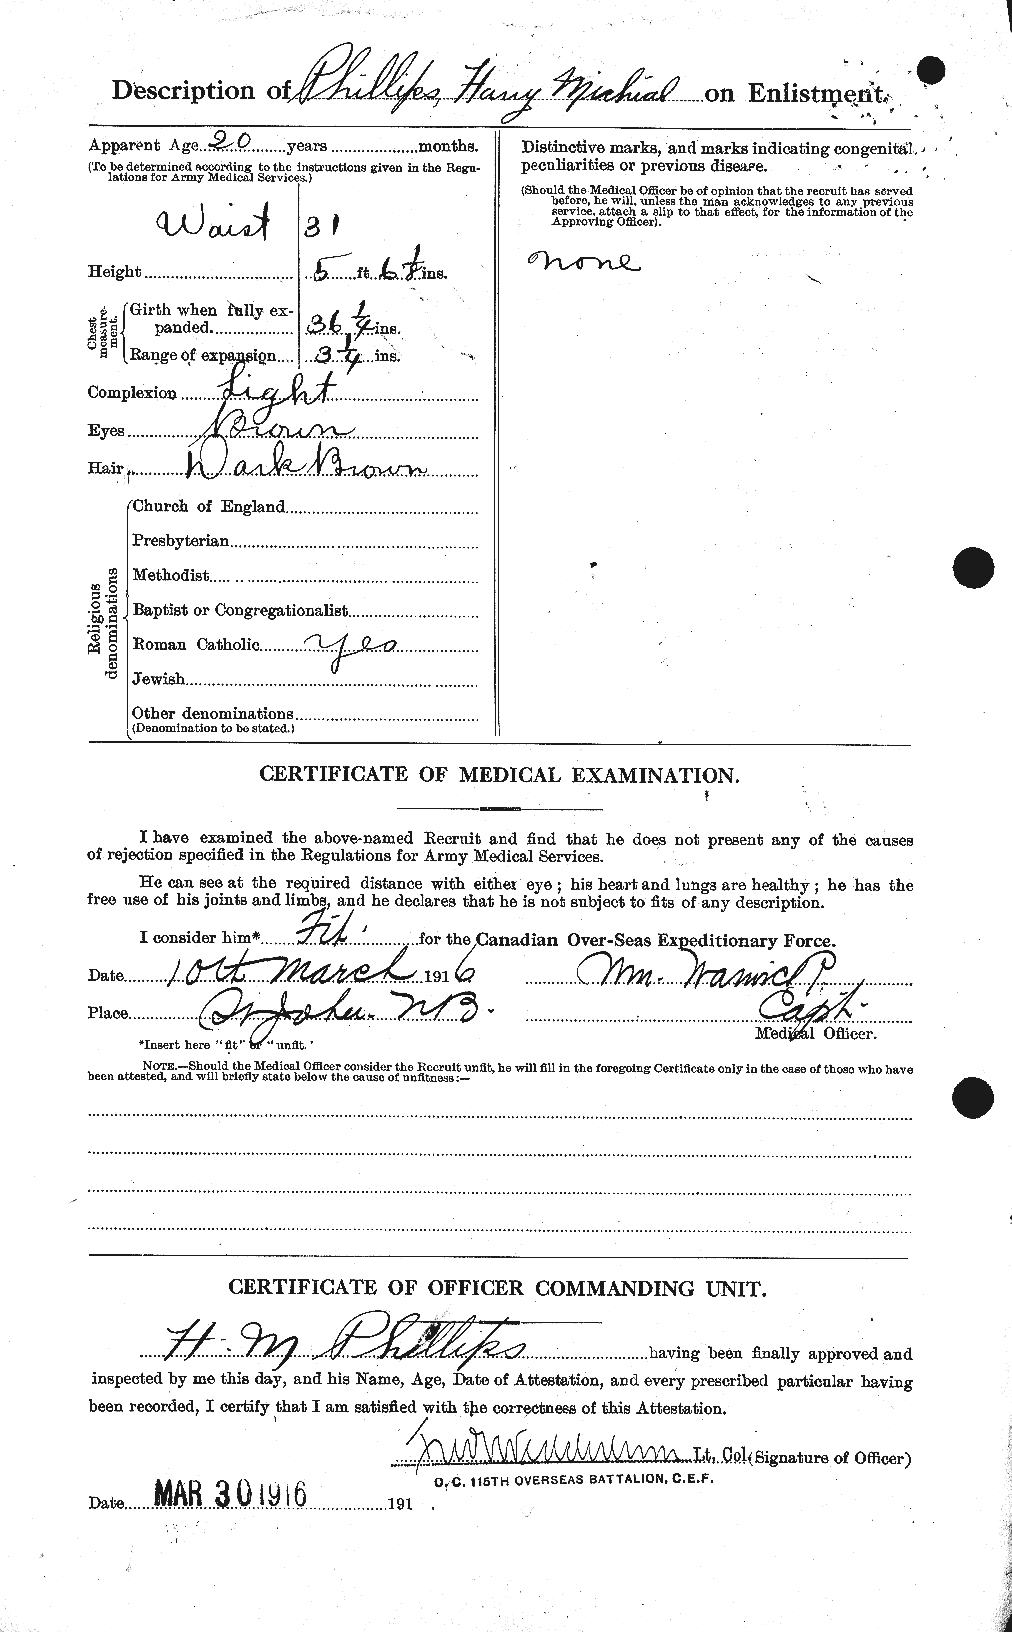 Personnel Records of the First World War - CEF 577592b